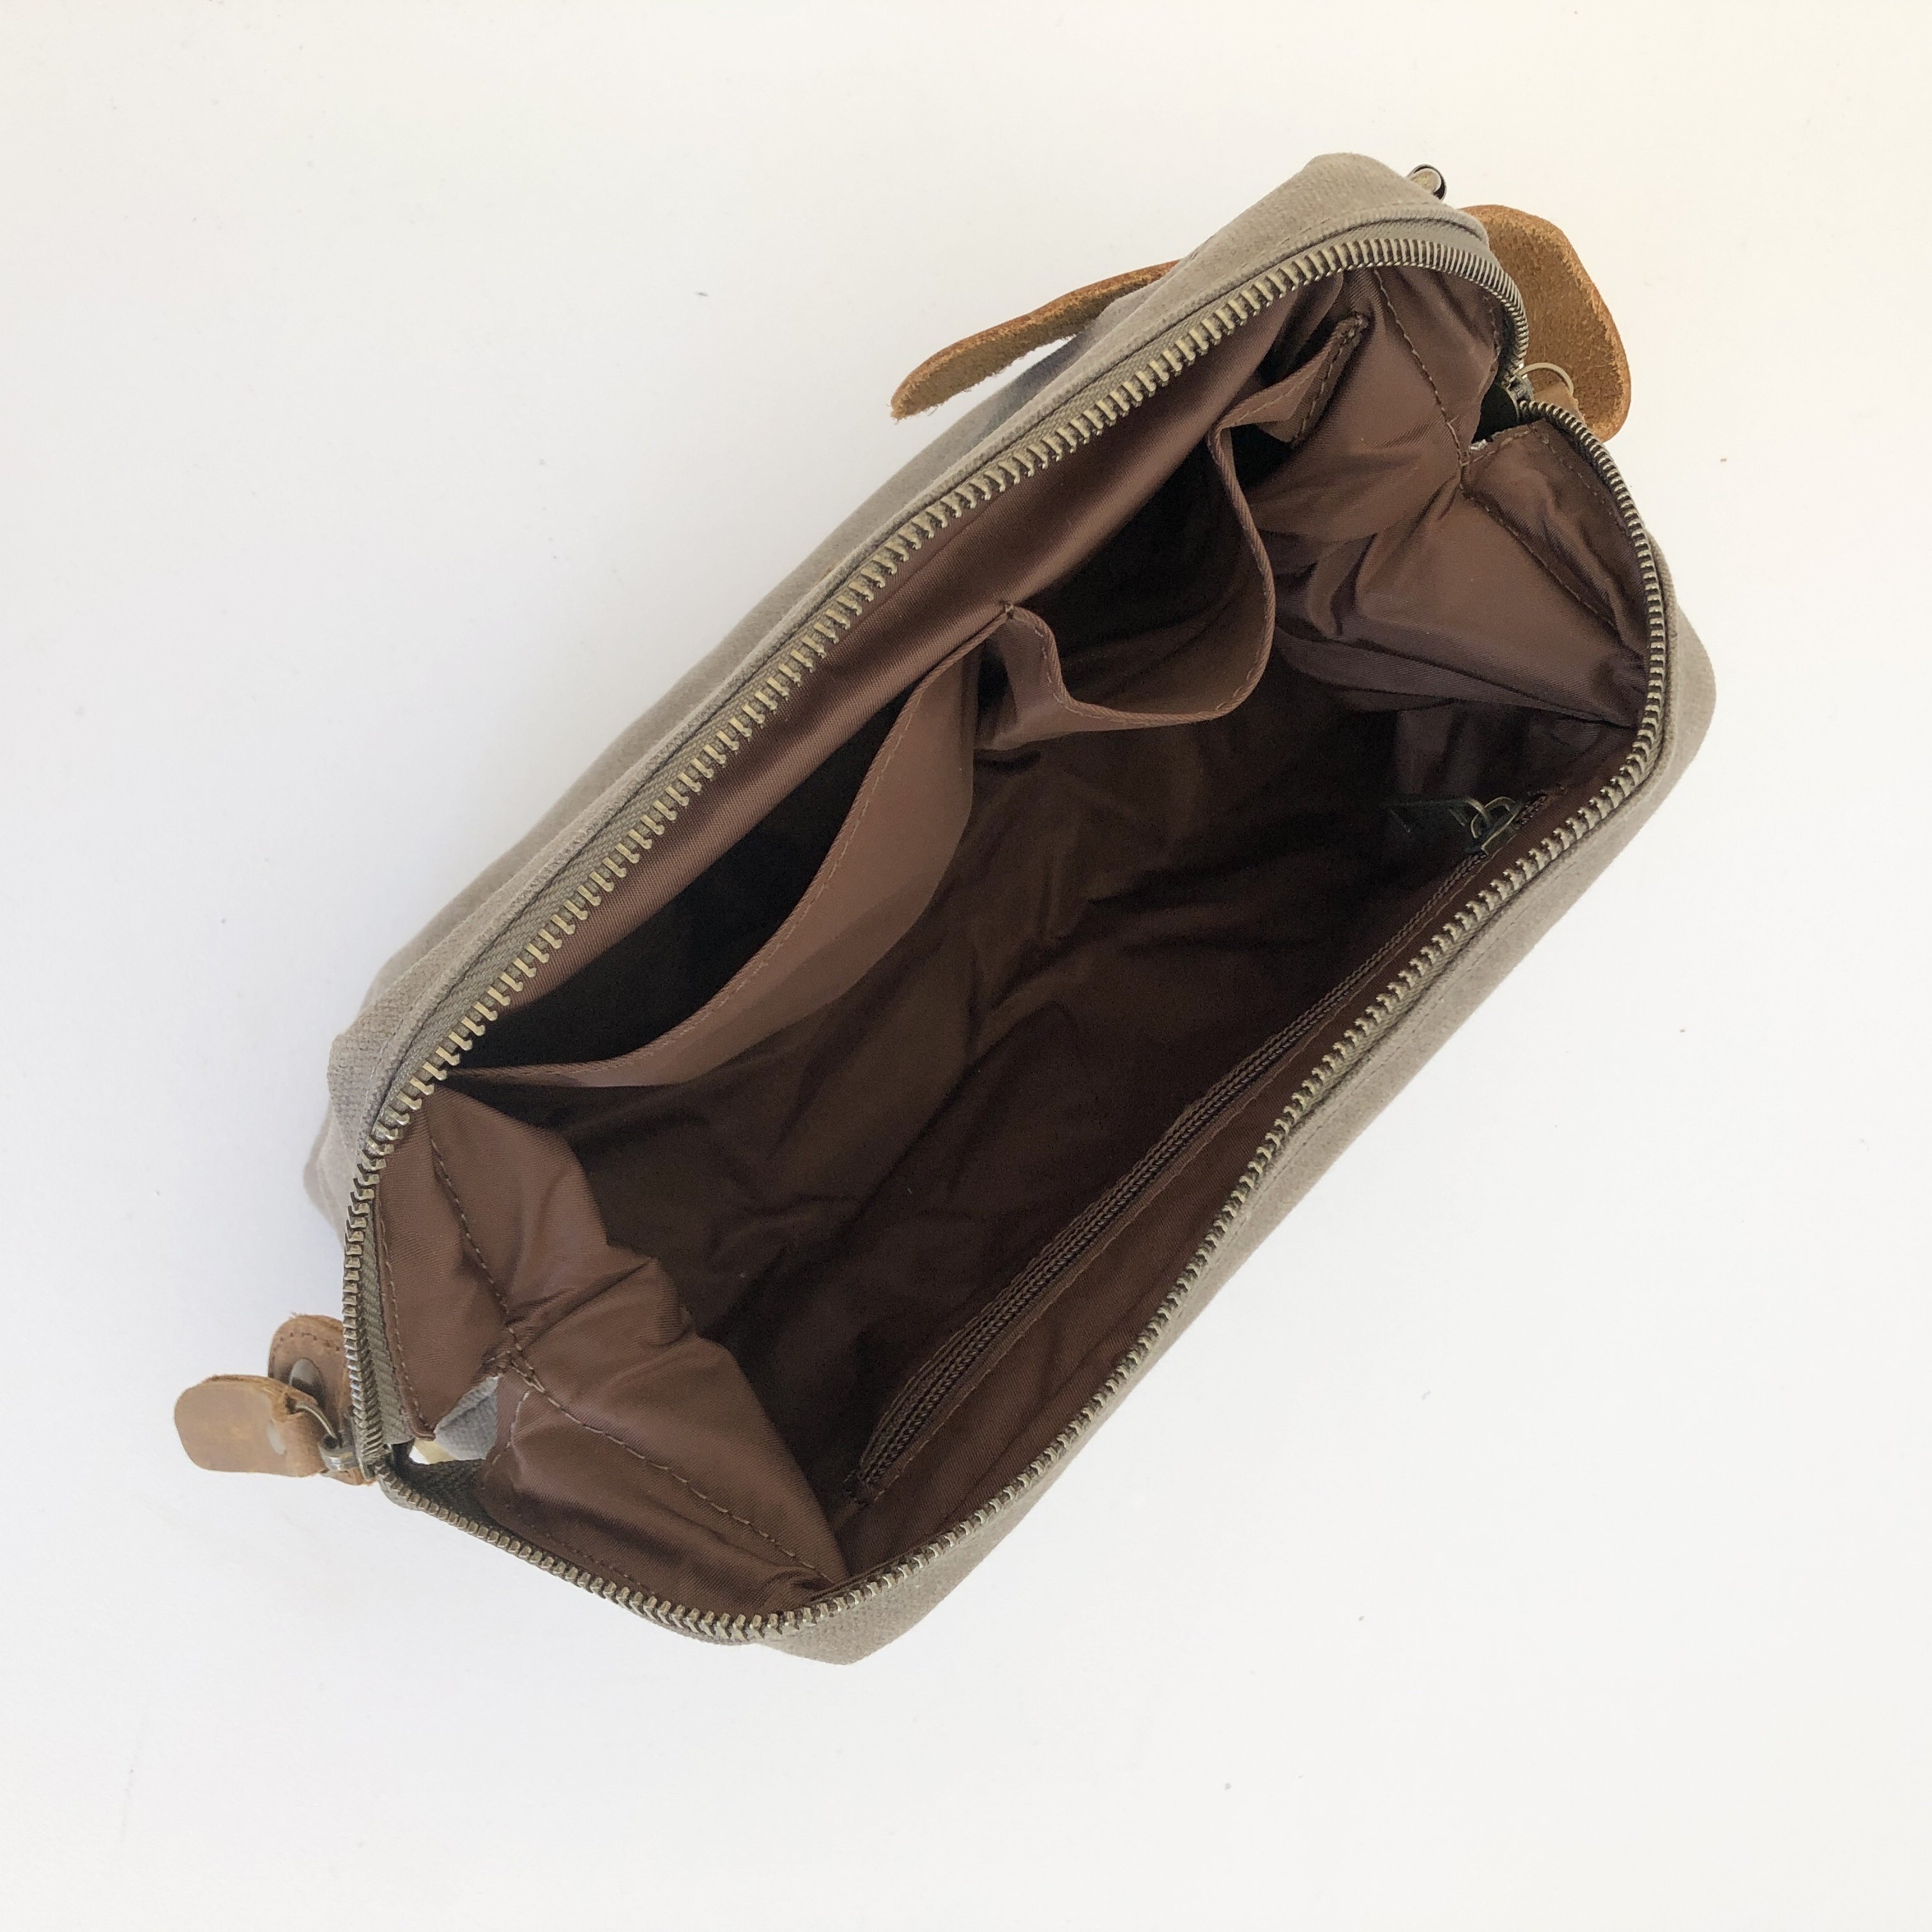 Waxed Canvas Toiletry Bag